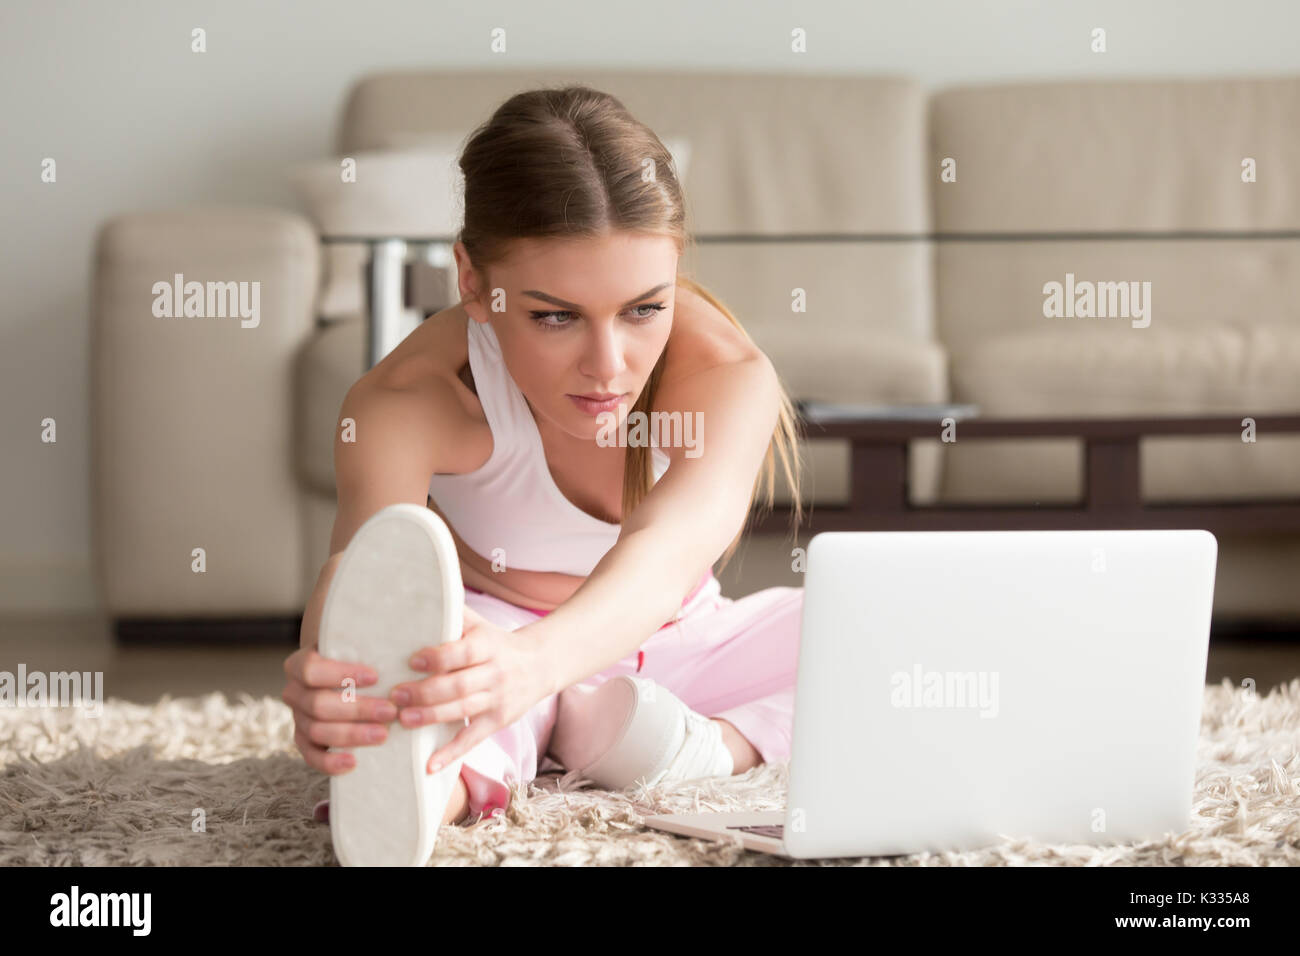 Flexible lady doing physical exercises at home Stock Photo